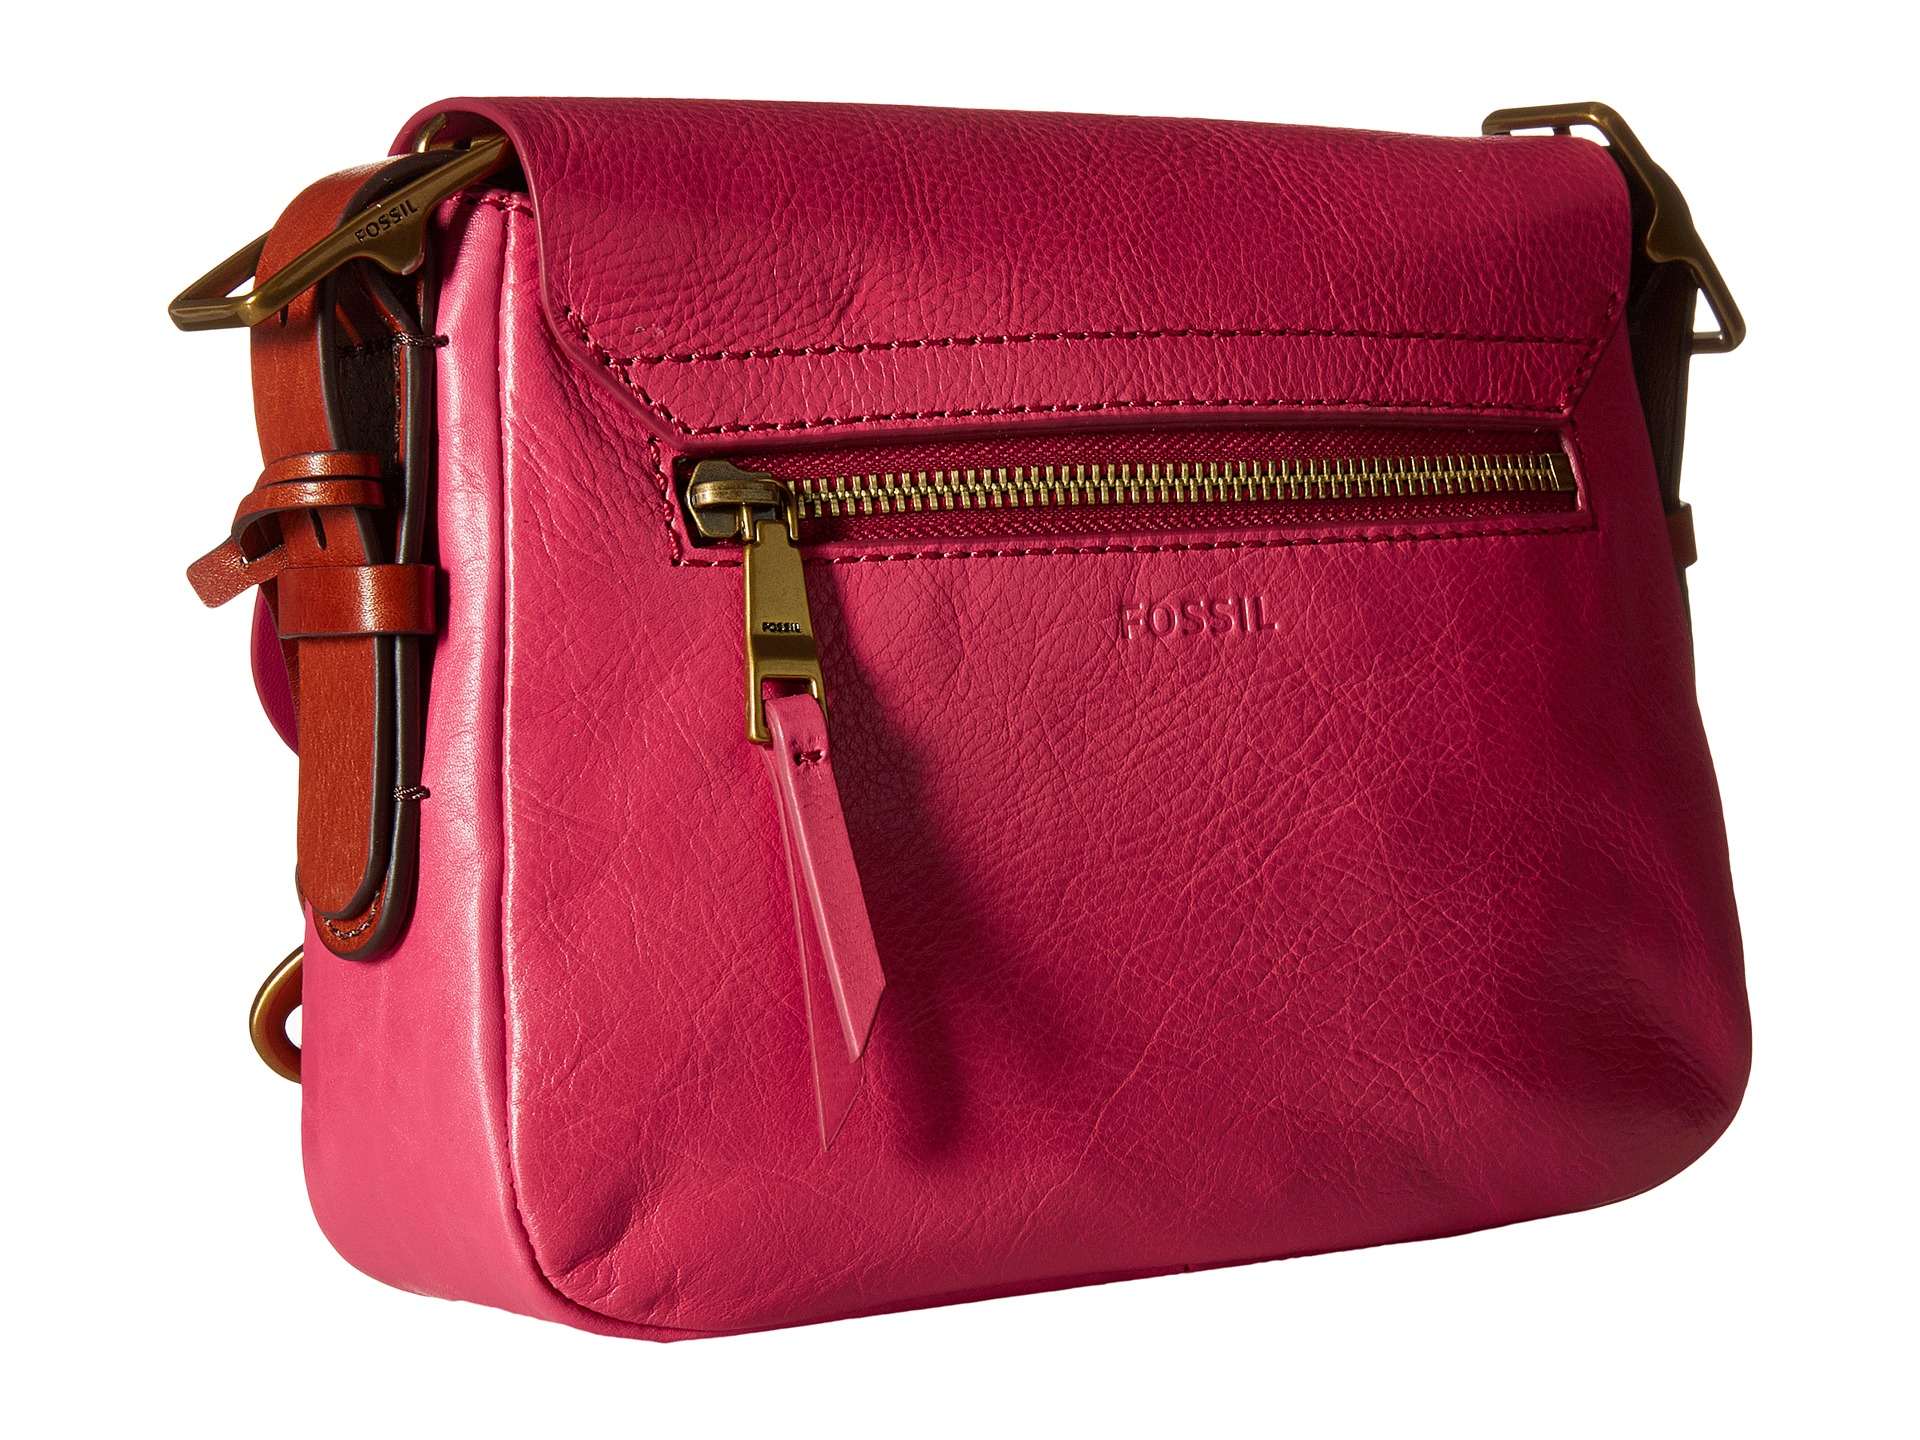 Lyst - Fossil Harper Small Saddle Crossbody in Red